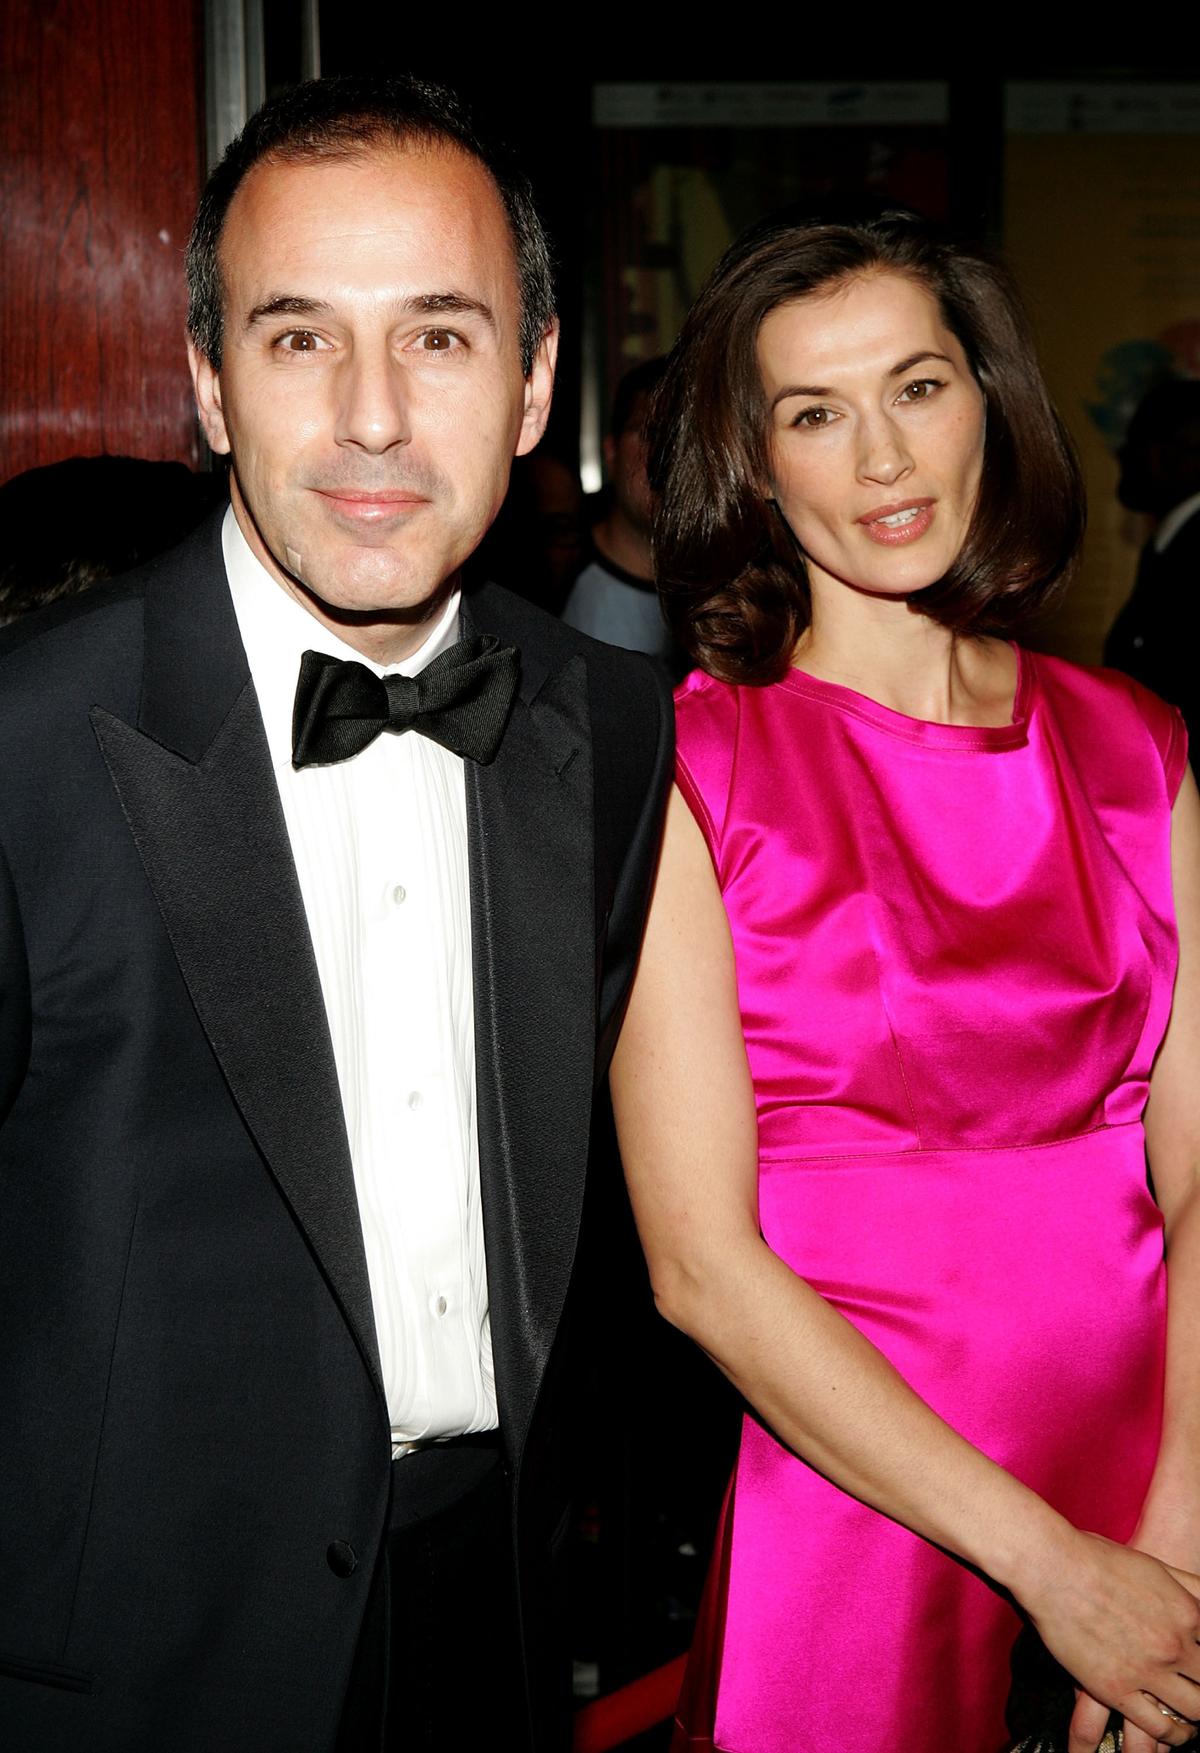 NBC "Today" show host Matt Lauer and wife Annette Roque arrive for Time Magazine Celebrates New "Time 100" list of Most Influential People In The World at the Time Warner Center on April 19, 2005 in New York City. (Photo by Paul Hawthorne/Getty Images)